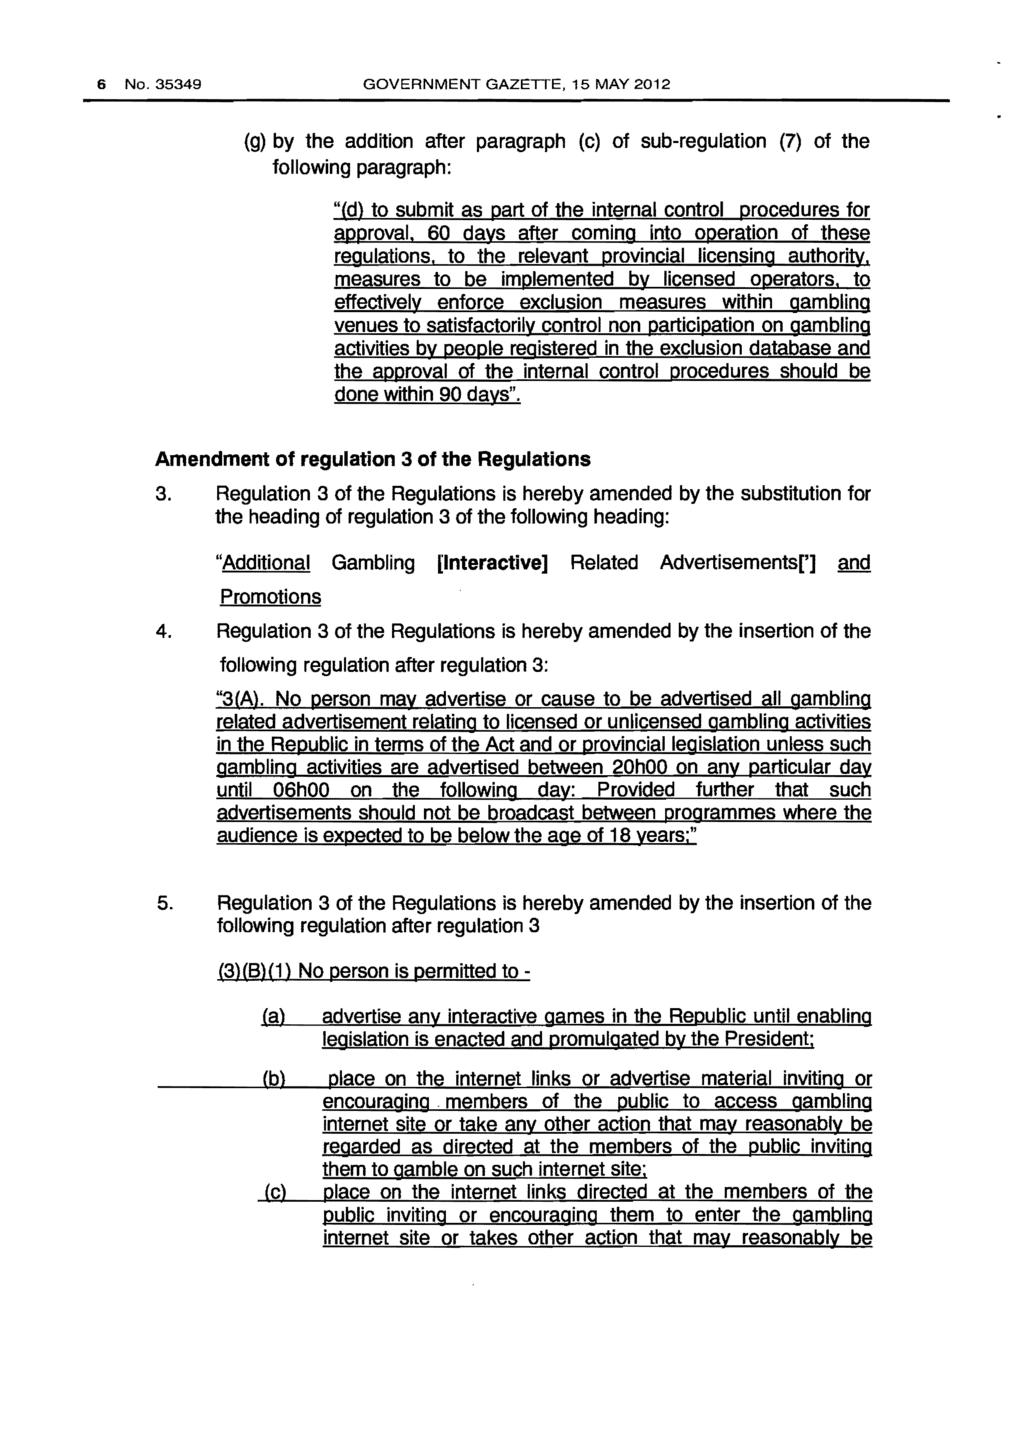 6 No.35349 GOVERNMENT GAZETTE, 15 MAY 2012 (g) by the addition after paragraph (c) of sub-regulation (7) of the following paragraph: "(d) to submit as part of the internal control procedures for